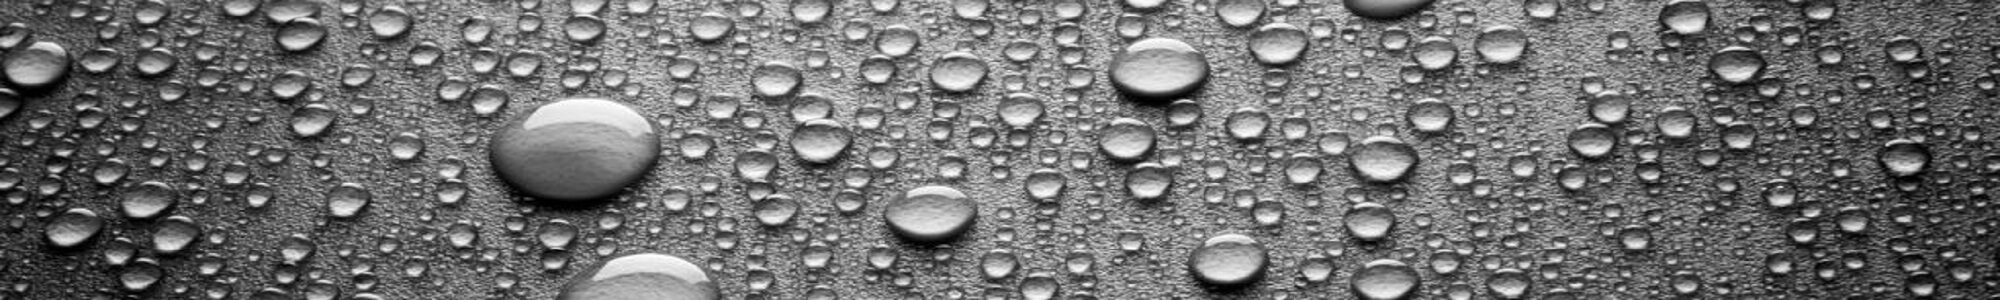 Drops,Of,Water-repellent,Surface,In,Black,&,White